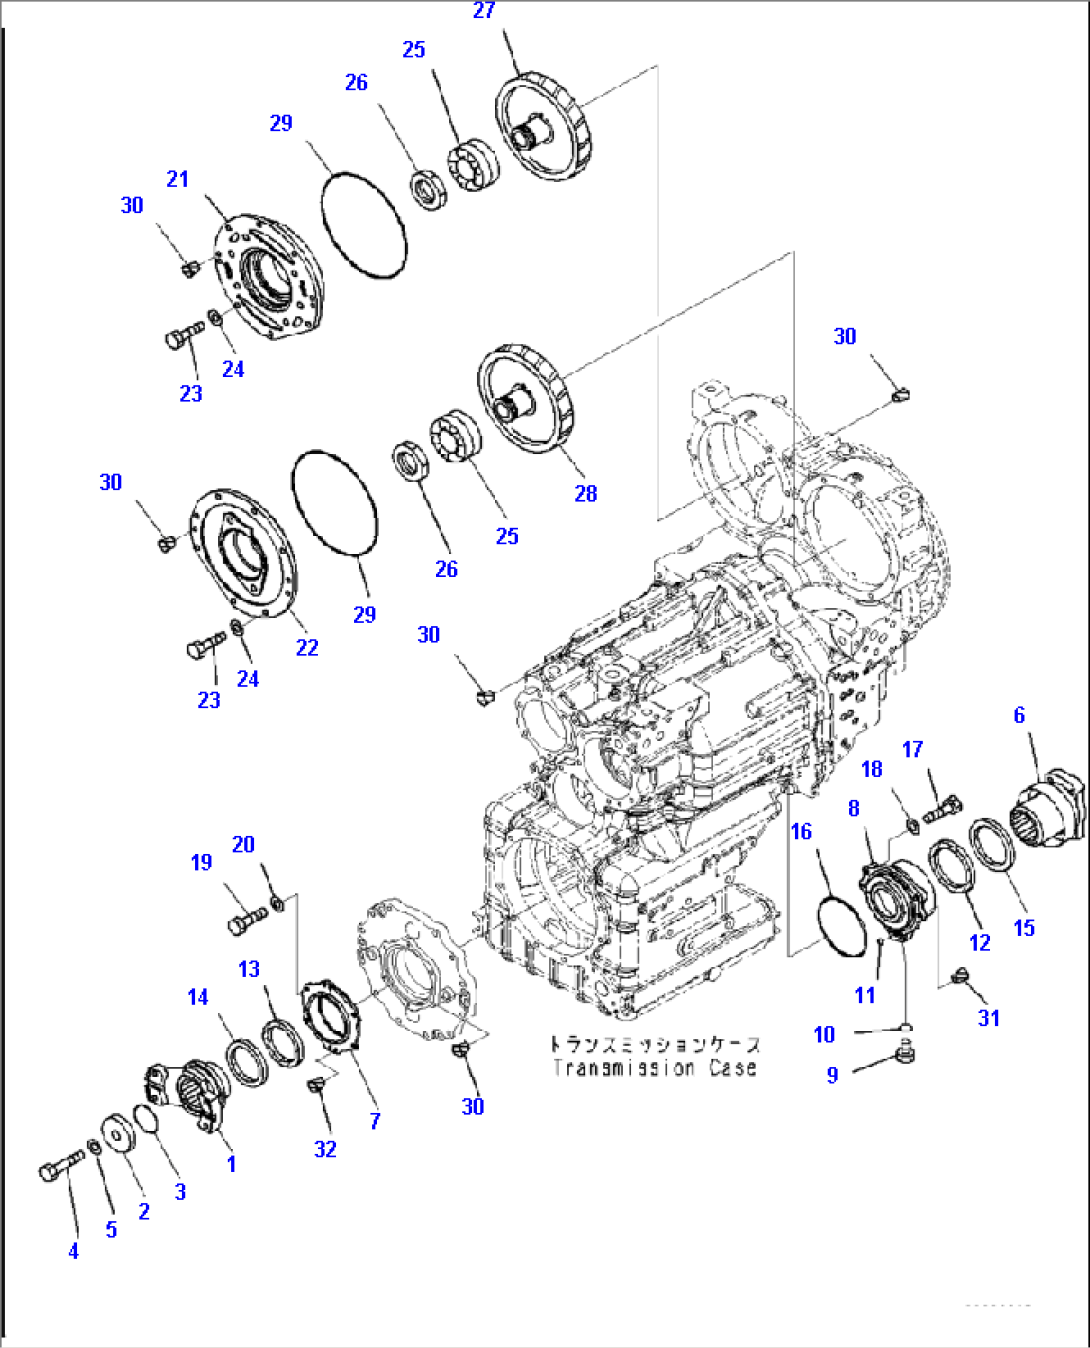 F4300-001017 TORQUE CONVERTER AND TRANSMISSION COUPLING